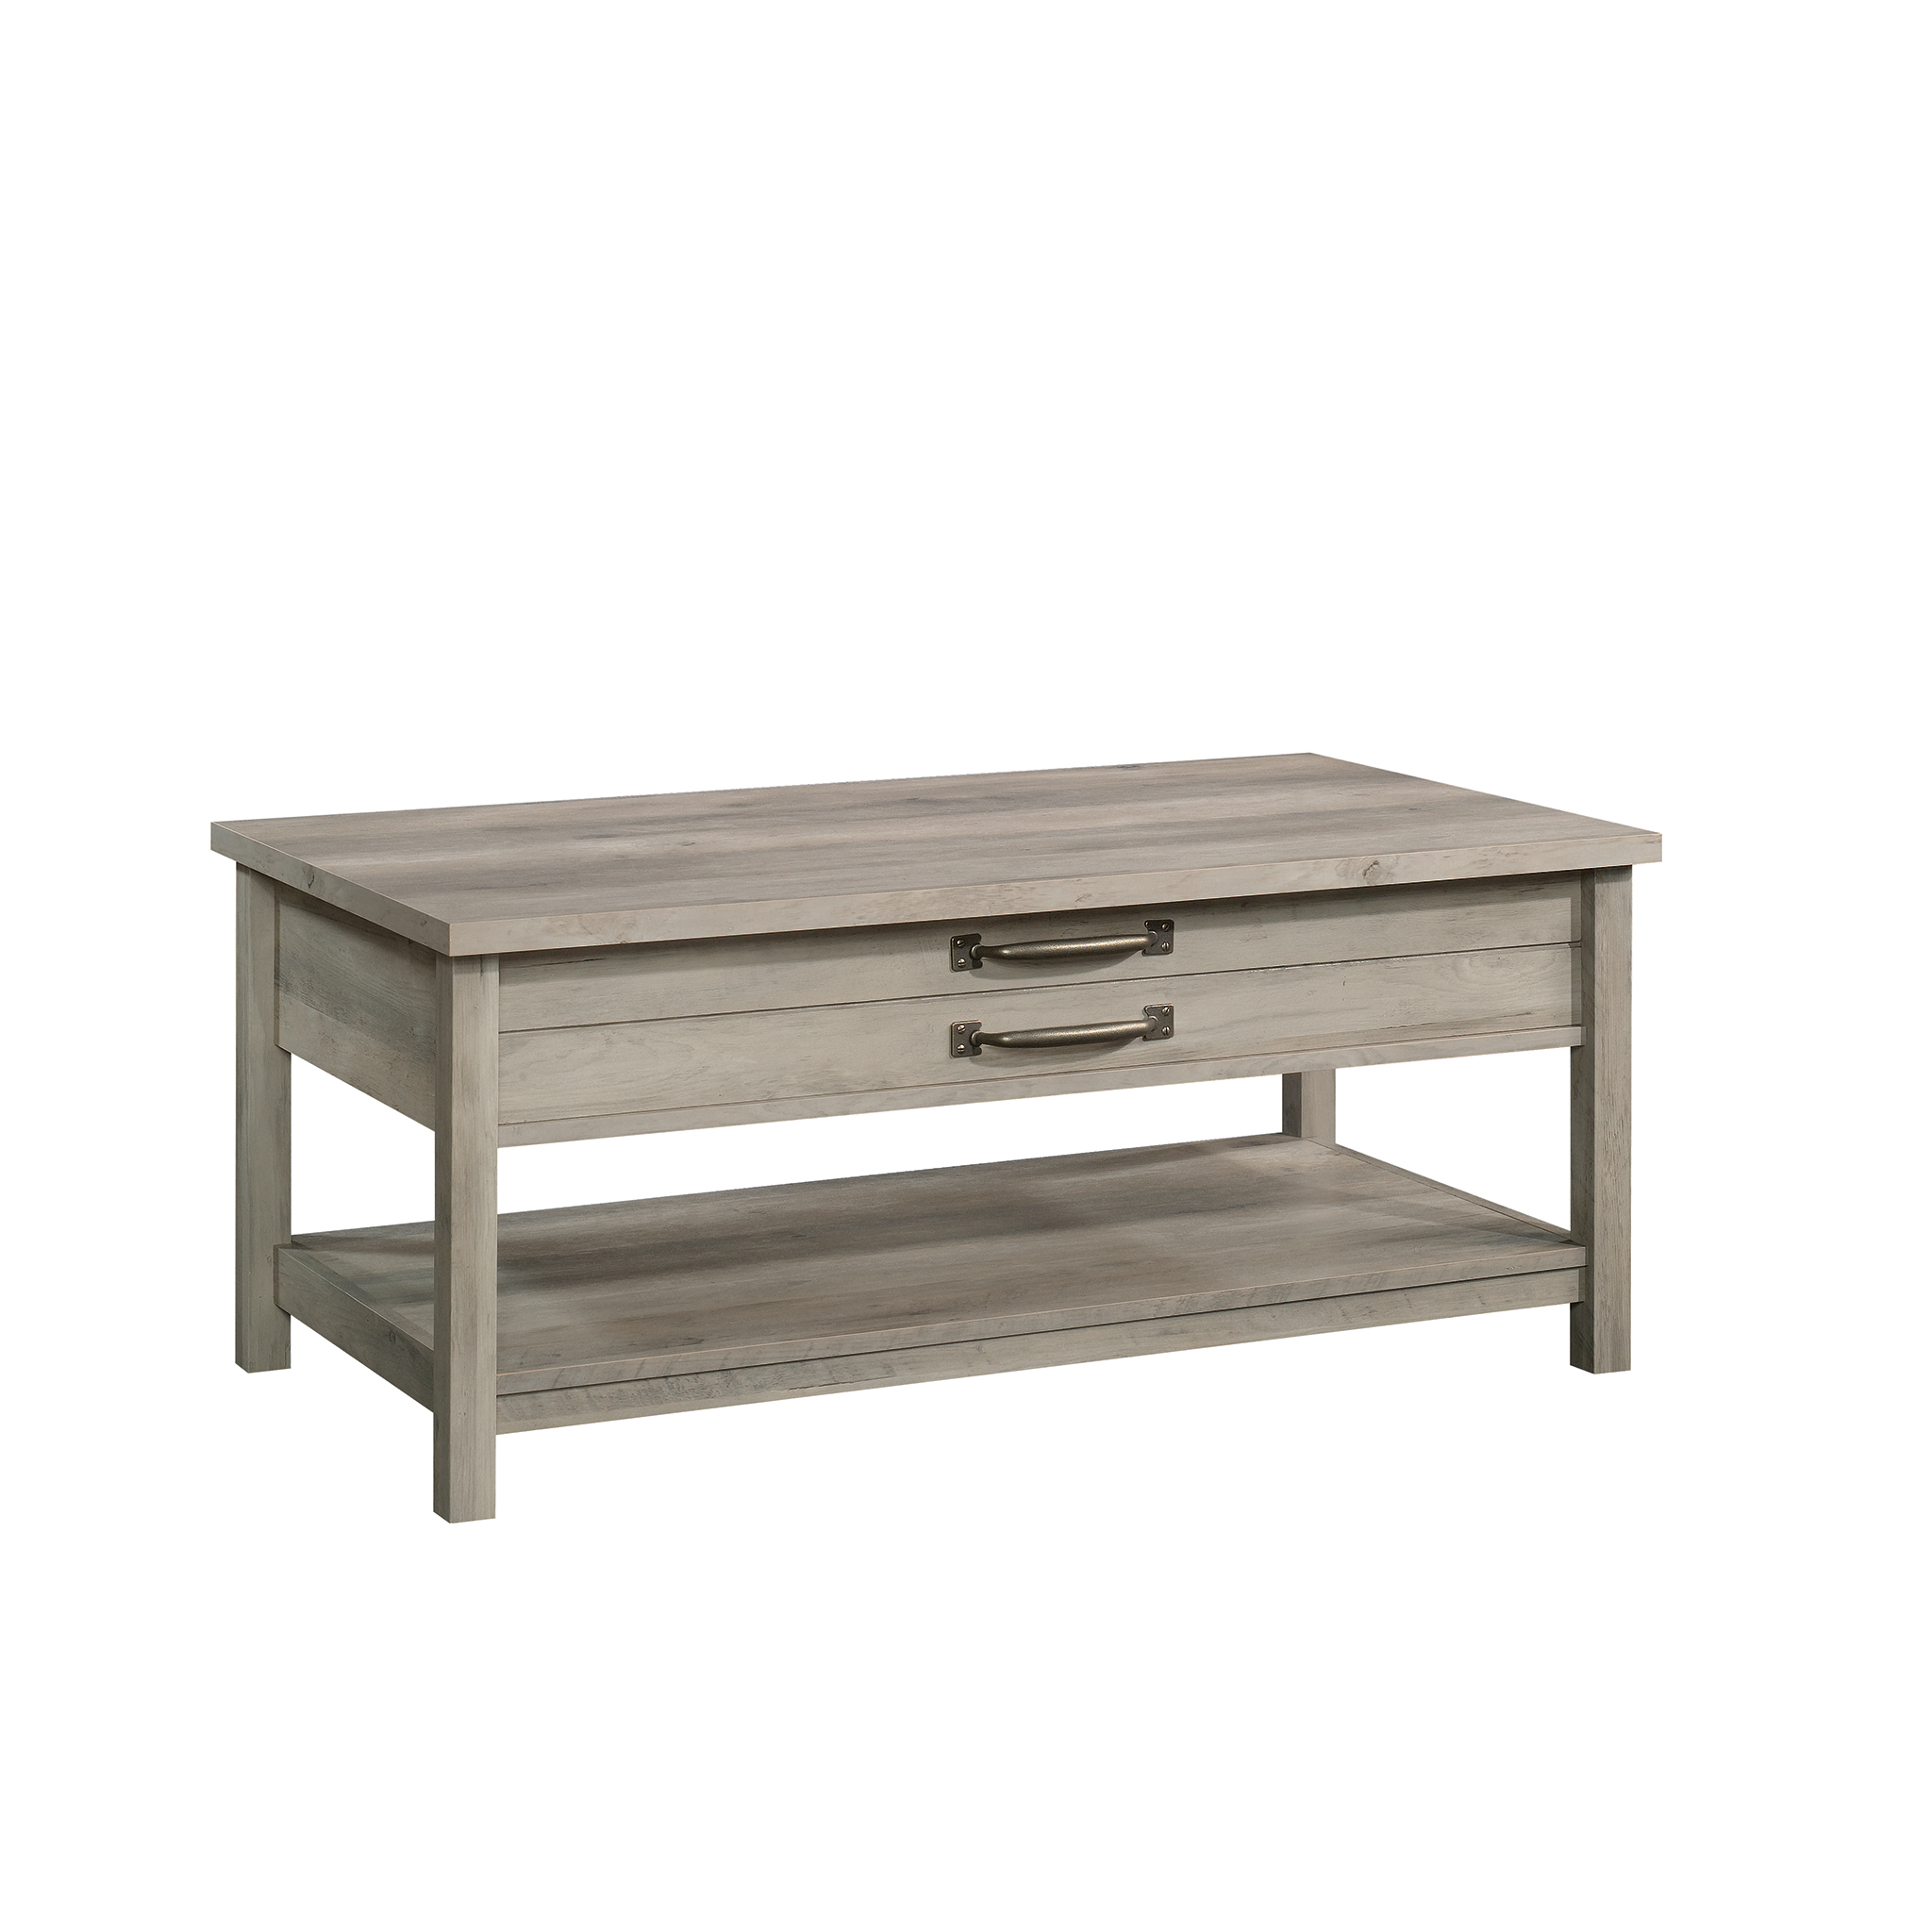 Better Homes & Gardens Modern Farmhouse Rectangle Lift-Top Coffee Table, Rustic Gray Finish - image 2 of 13